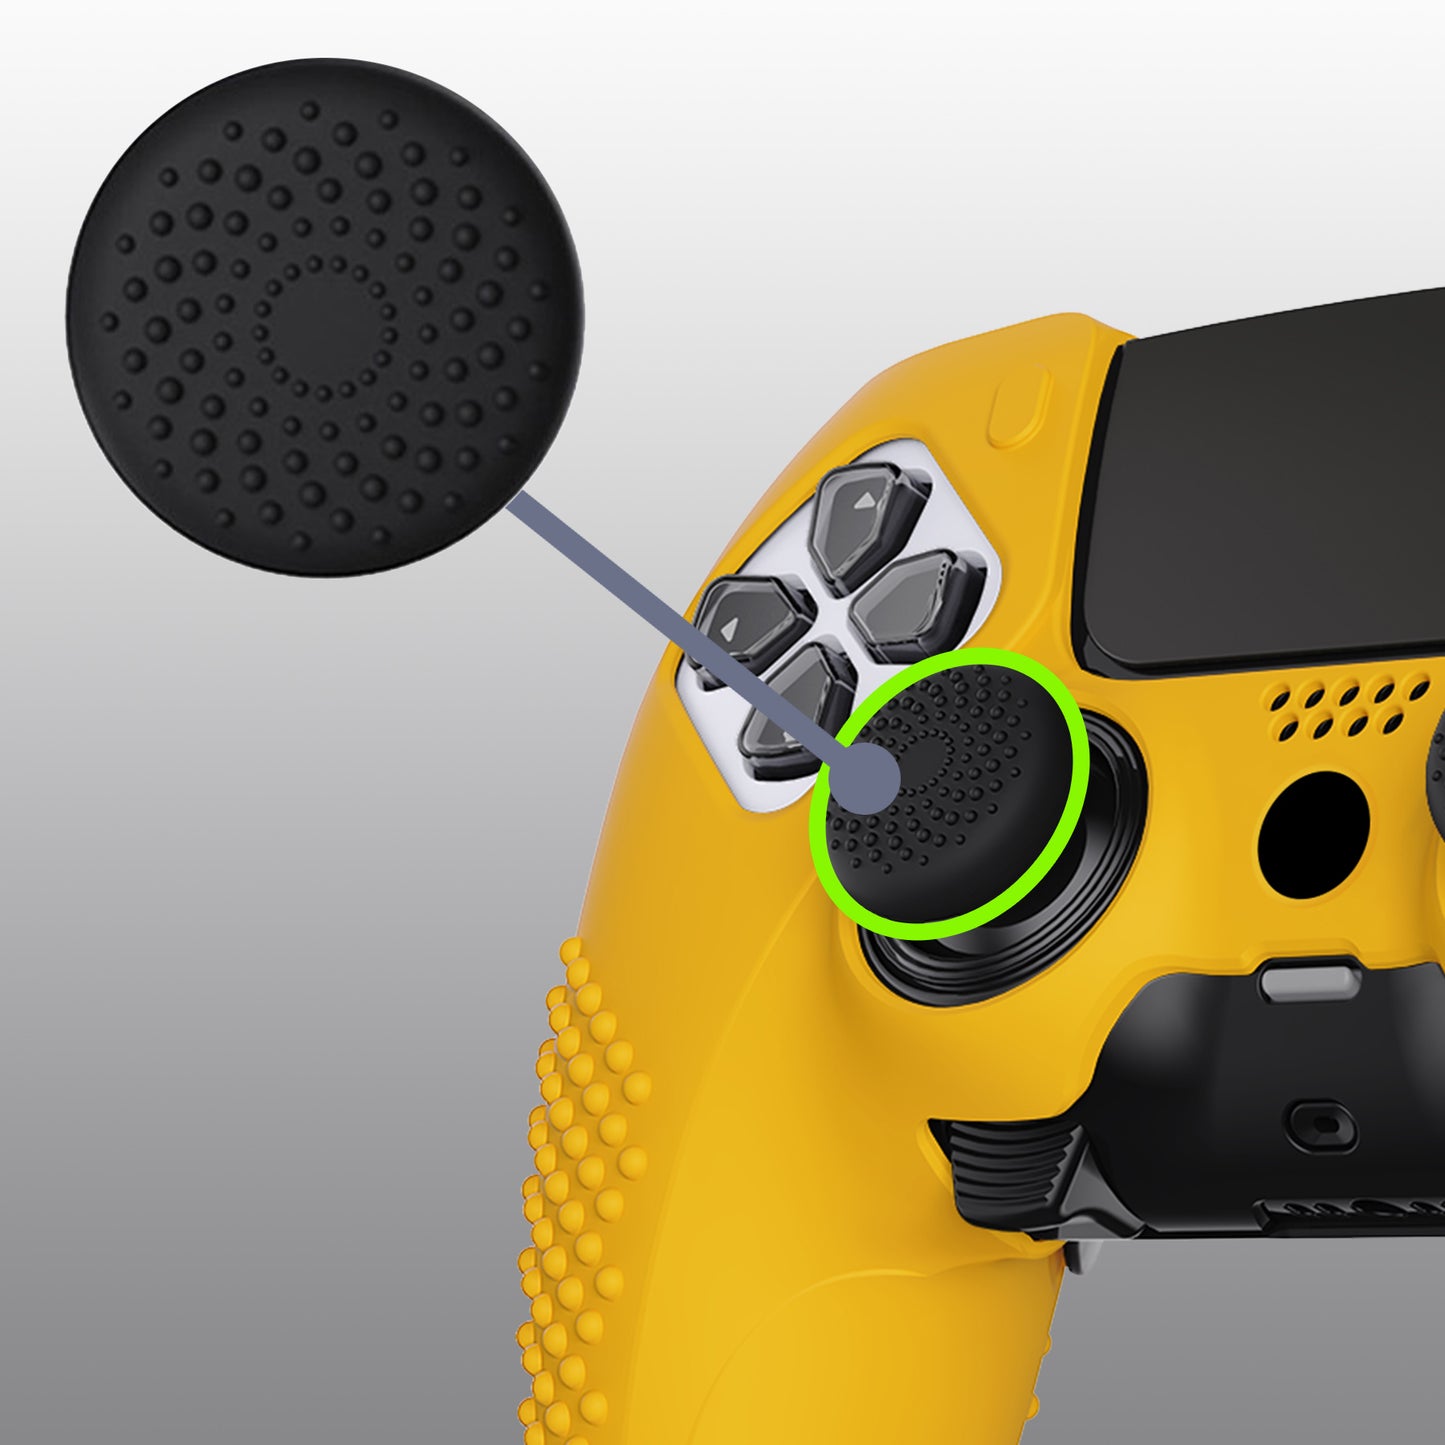 PlayVital 3D Studded Edition Anti-Slip Silicone Cover Case with Thumb Grip Caps for PS5 Edge Controller - Caution Yellow - ETPFP014 PlayVital